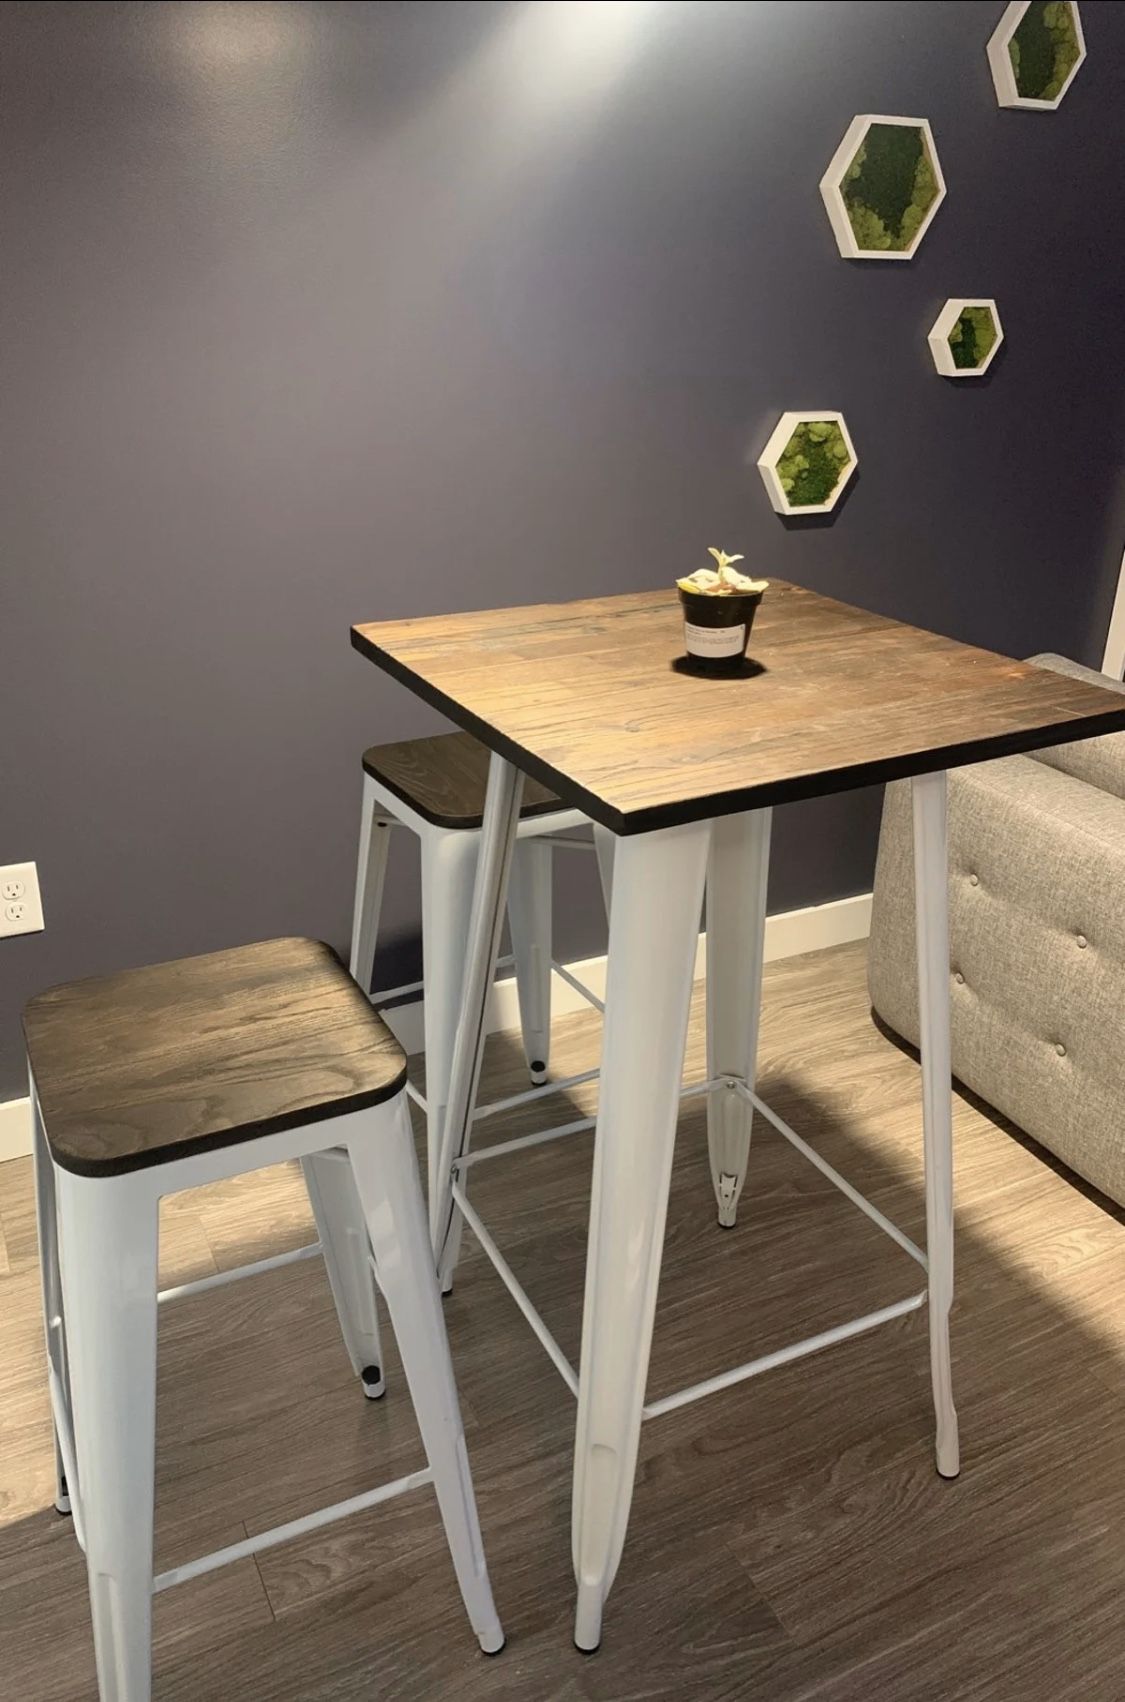 Dining table with high chairs